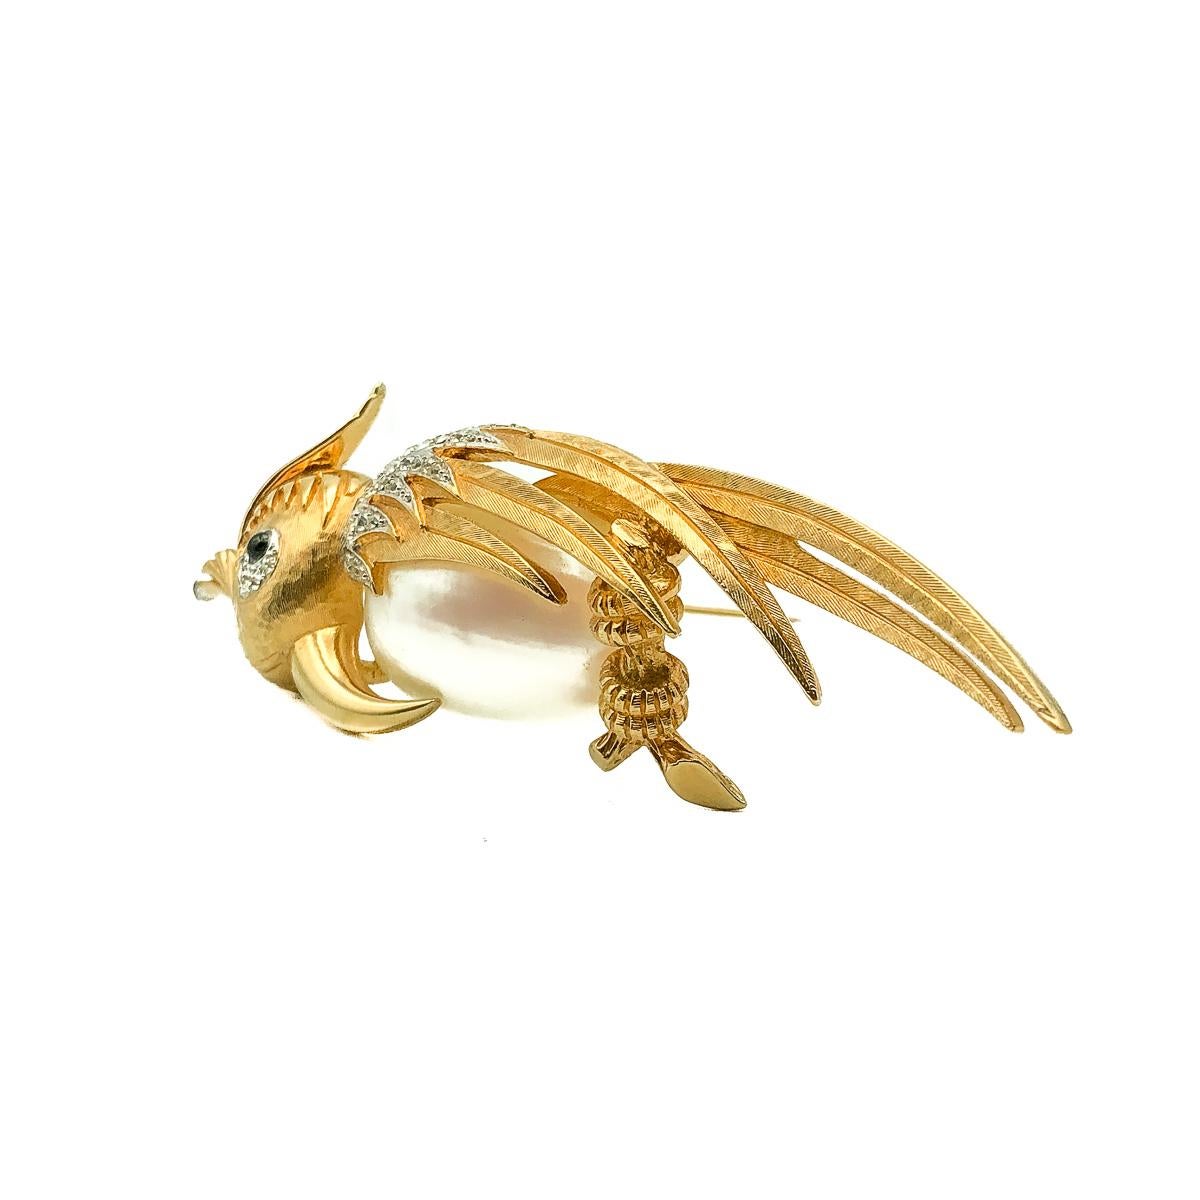 Vintage Boucher Cockatoo Brooch. Crafted in gold plated metal, mother of pearl and crystals. An impressive and large bird design pin, inspired by a Cockatoo. Embellished with a wonderful and large mother of pearl belly and adorned with crystal